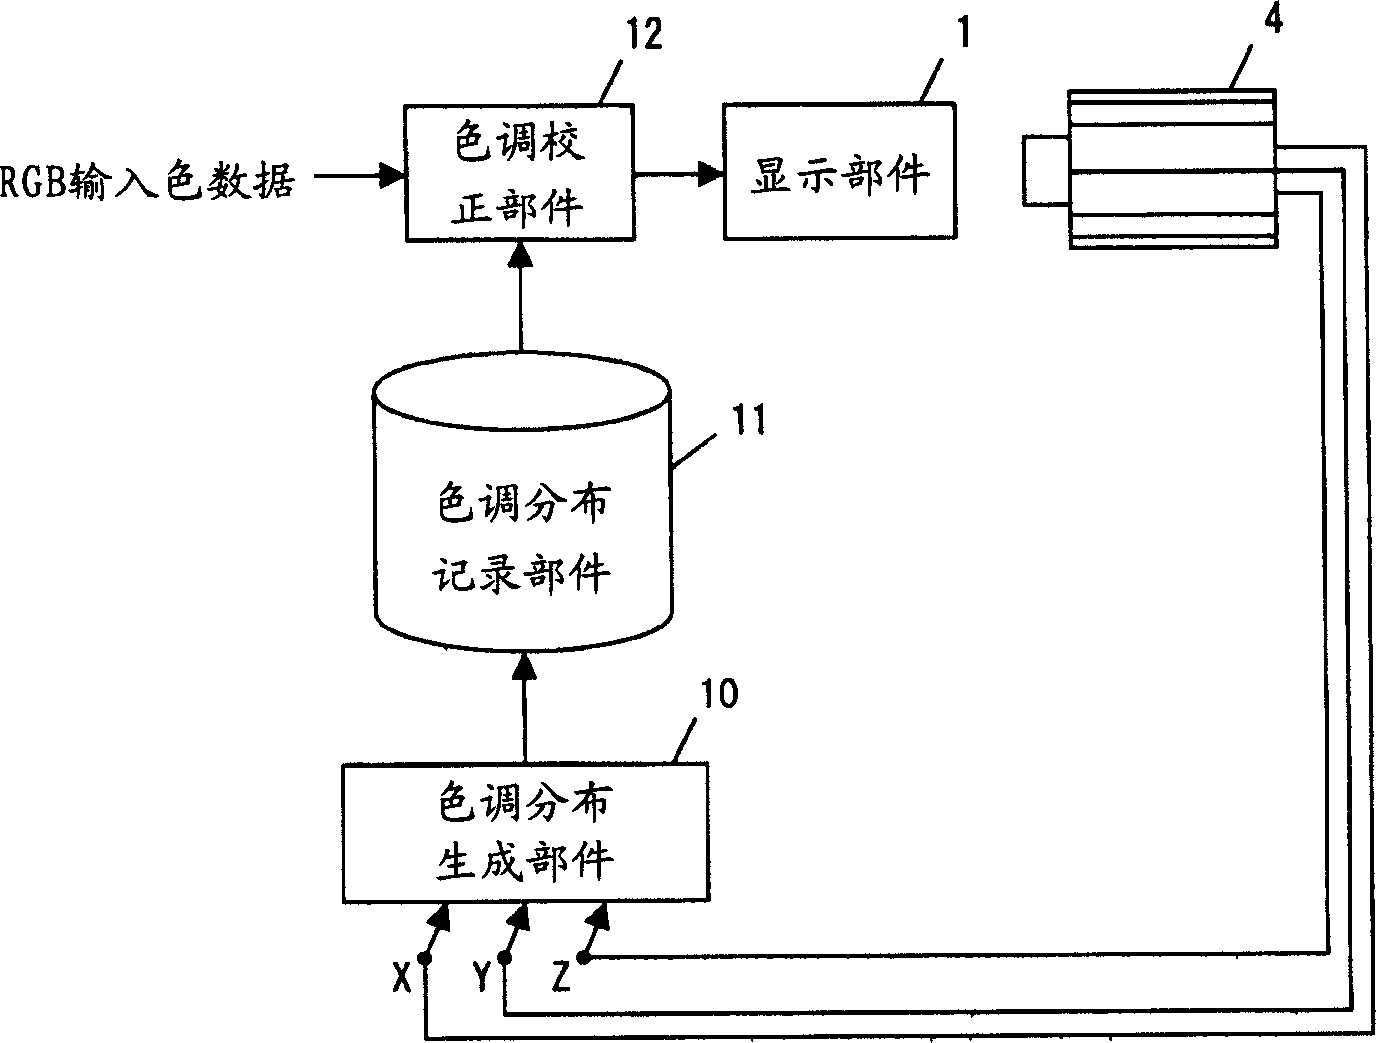 Color image display apparatus, color converter, color-simulating apparatus, and method for the same